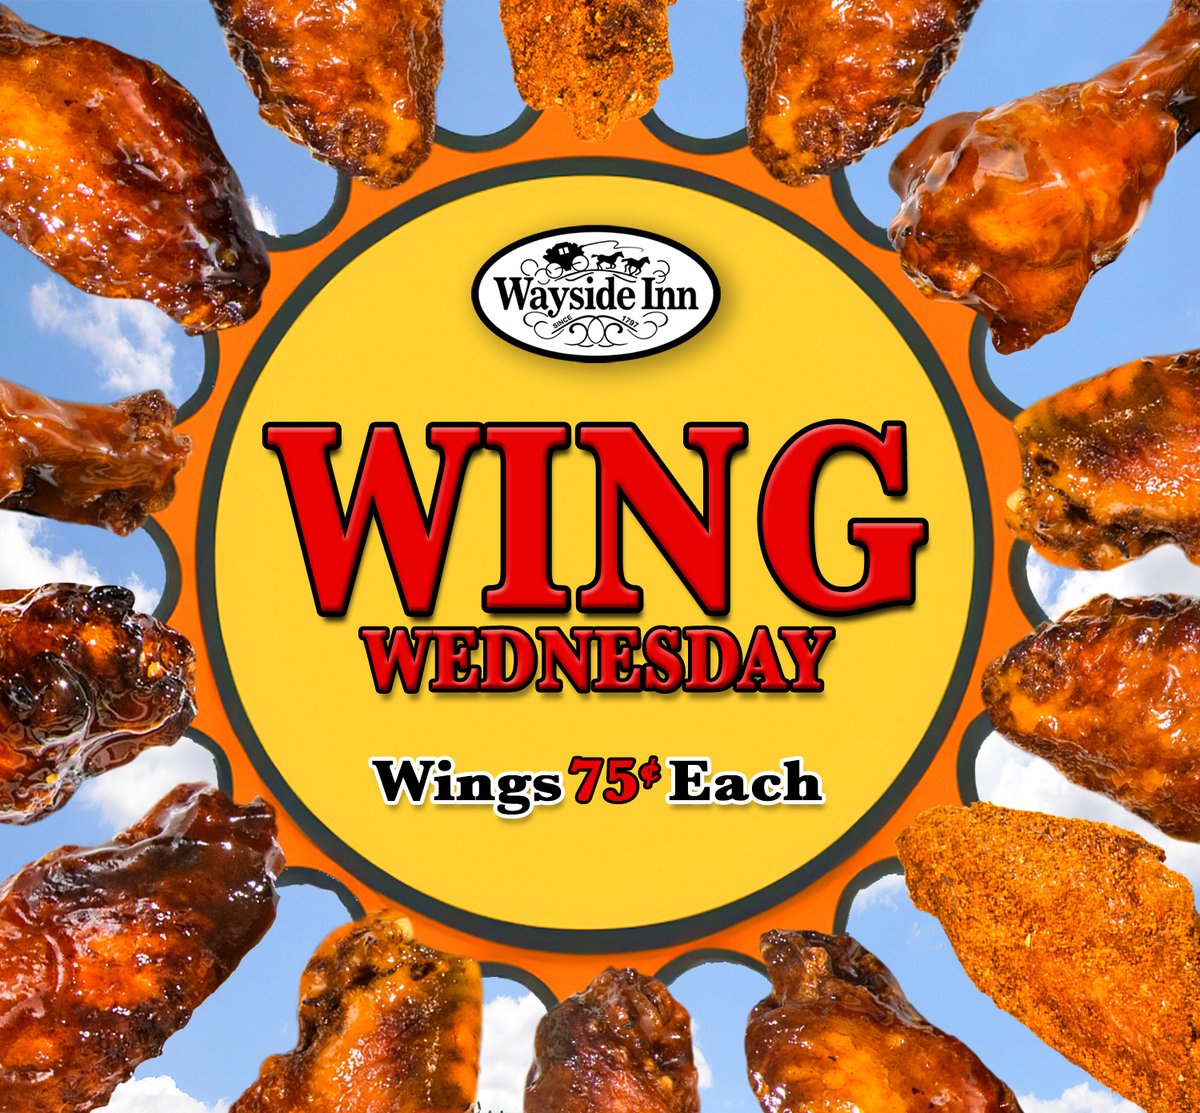 Though the rain falls today and tomorrow, tomorrow brings rays of happiness...Wings. WING WEDNESDAY

Every Wed. 4 – 8 pm

#WingWednesdays #WingLovers #FlavorExplosion #ilovewings #bestwings #waysidewings #winchesterva #middletownfood #vafoodies #wings #HotWings #Virginiadining